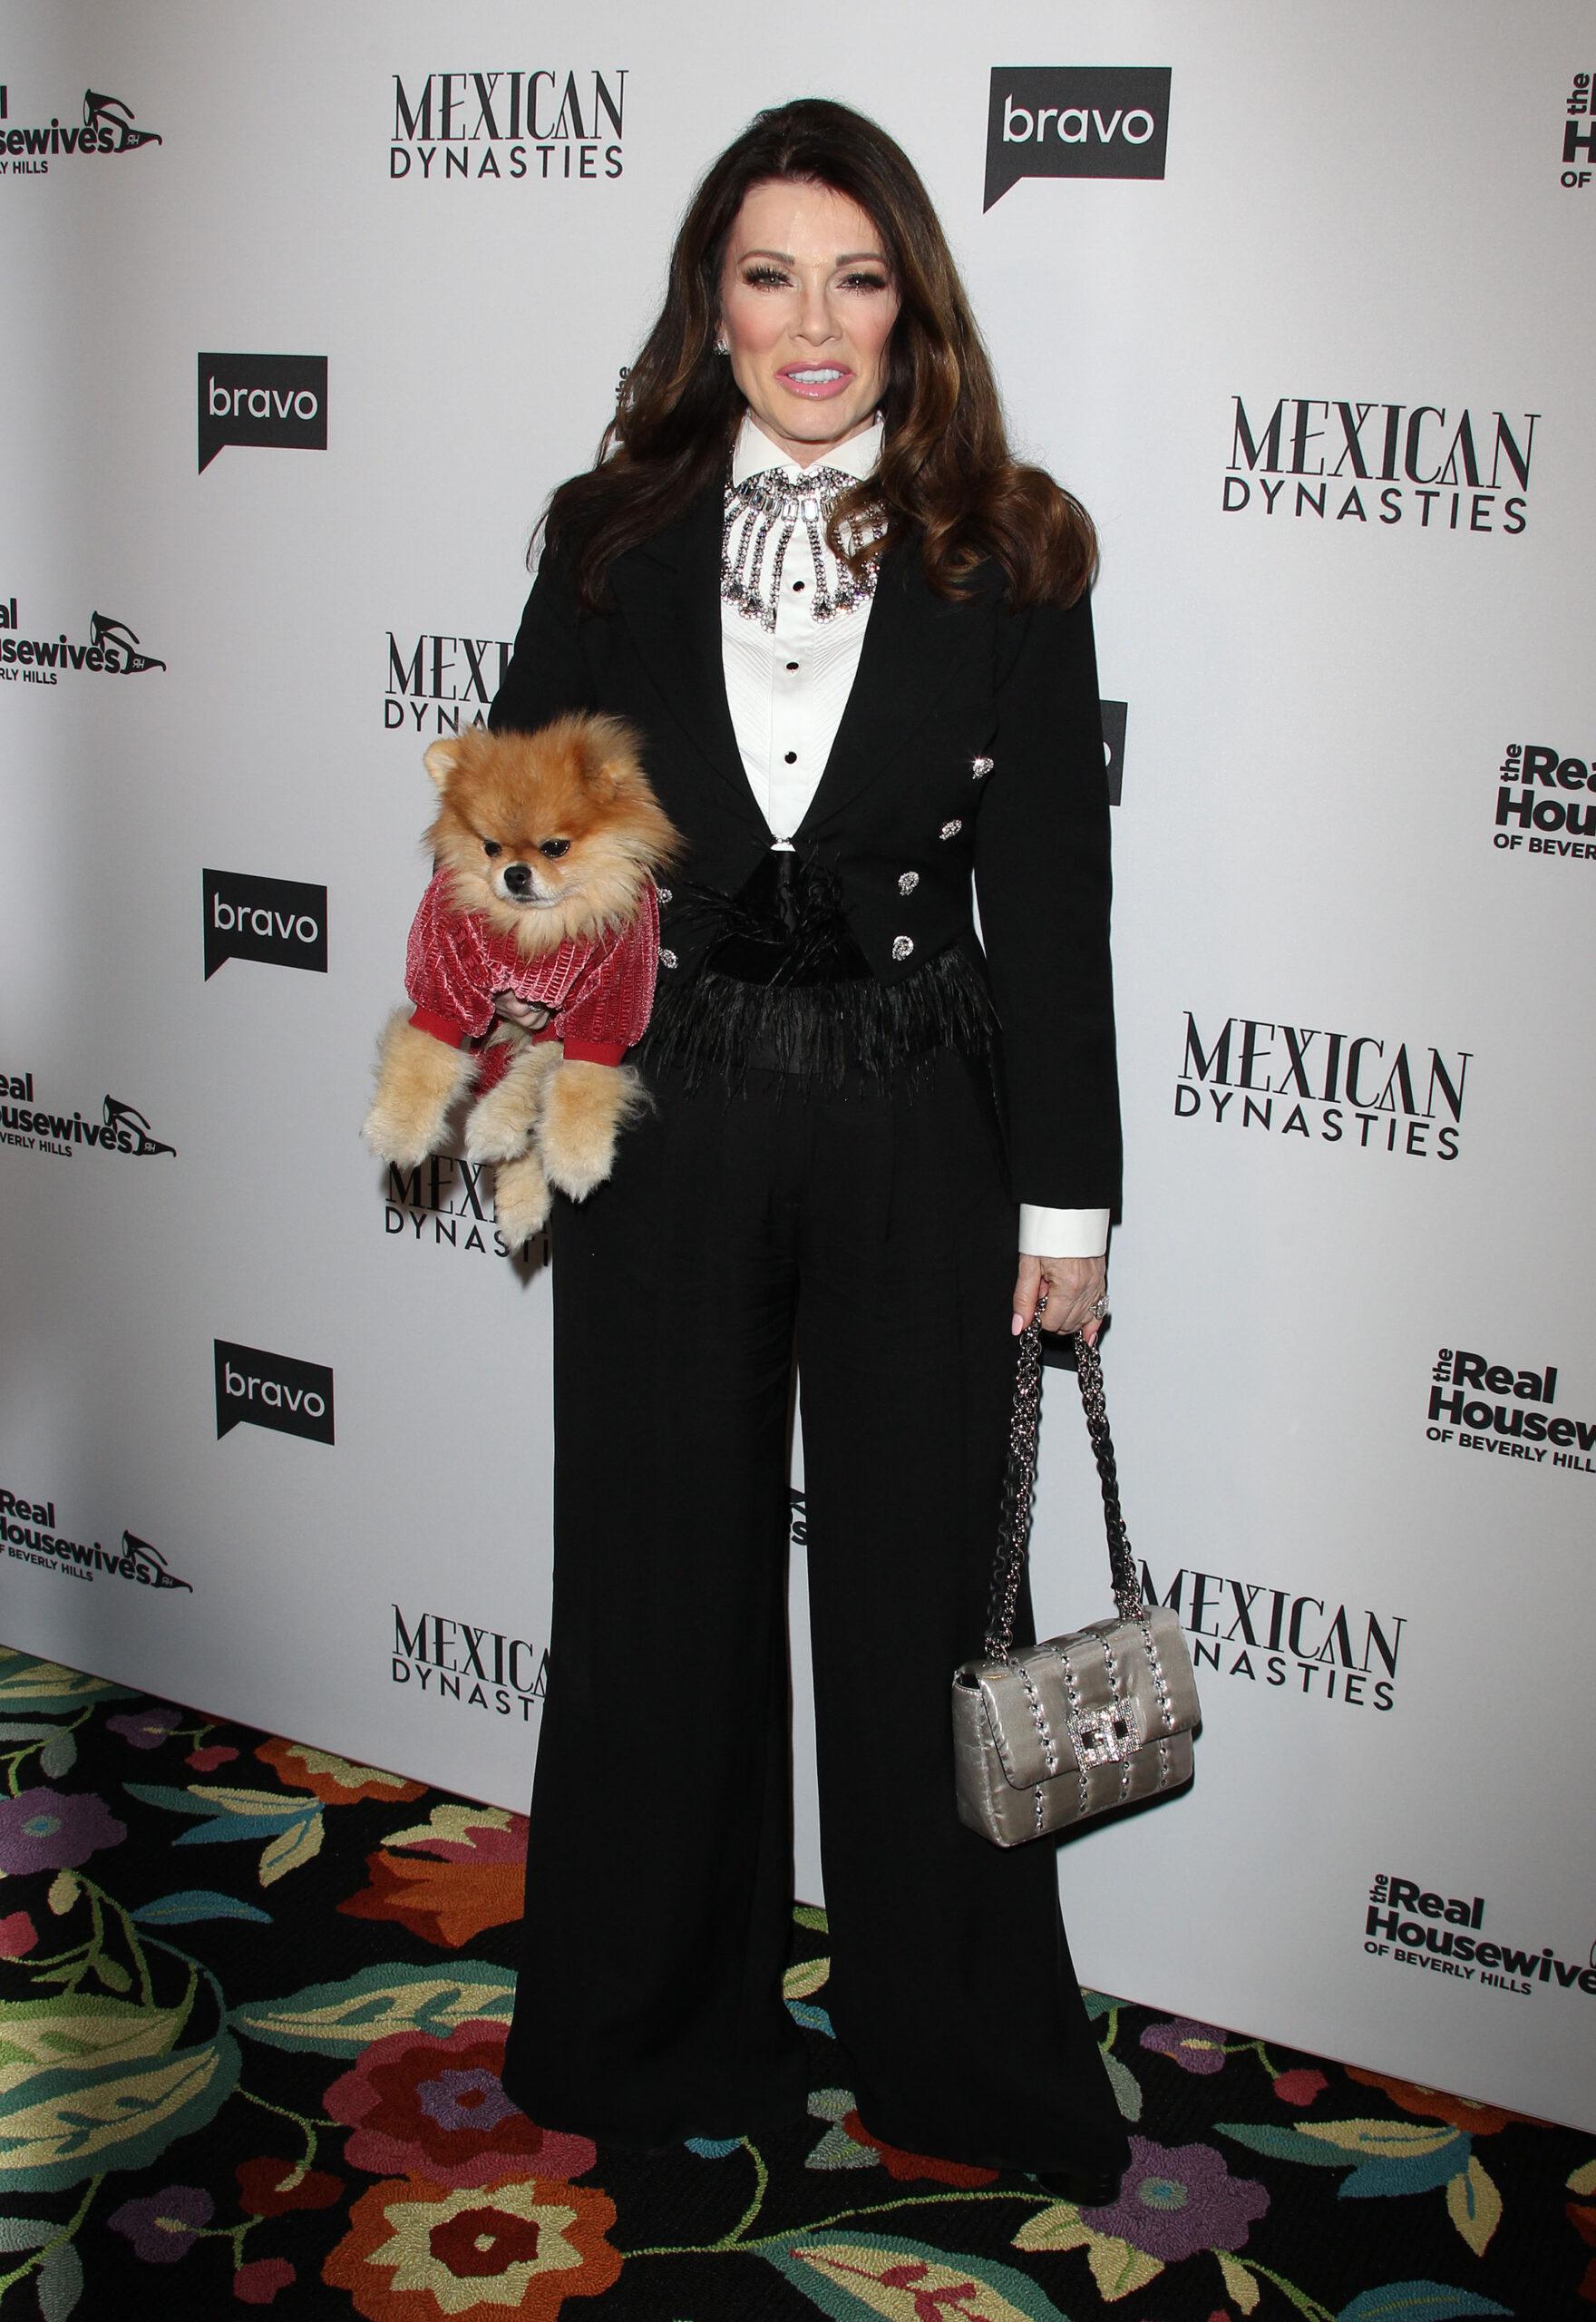 Lisa Vanderpump at the Mexican Dynasties and The Real Housewives of Beverly Hills Premiere Party